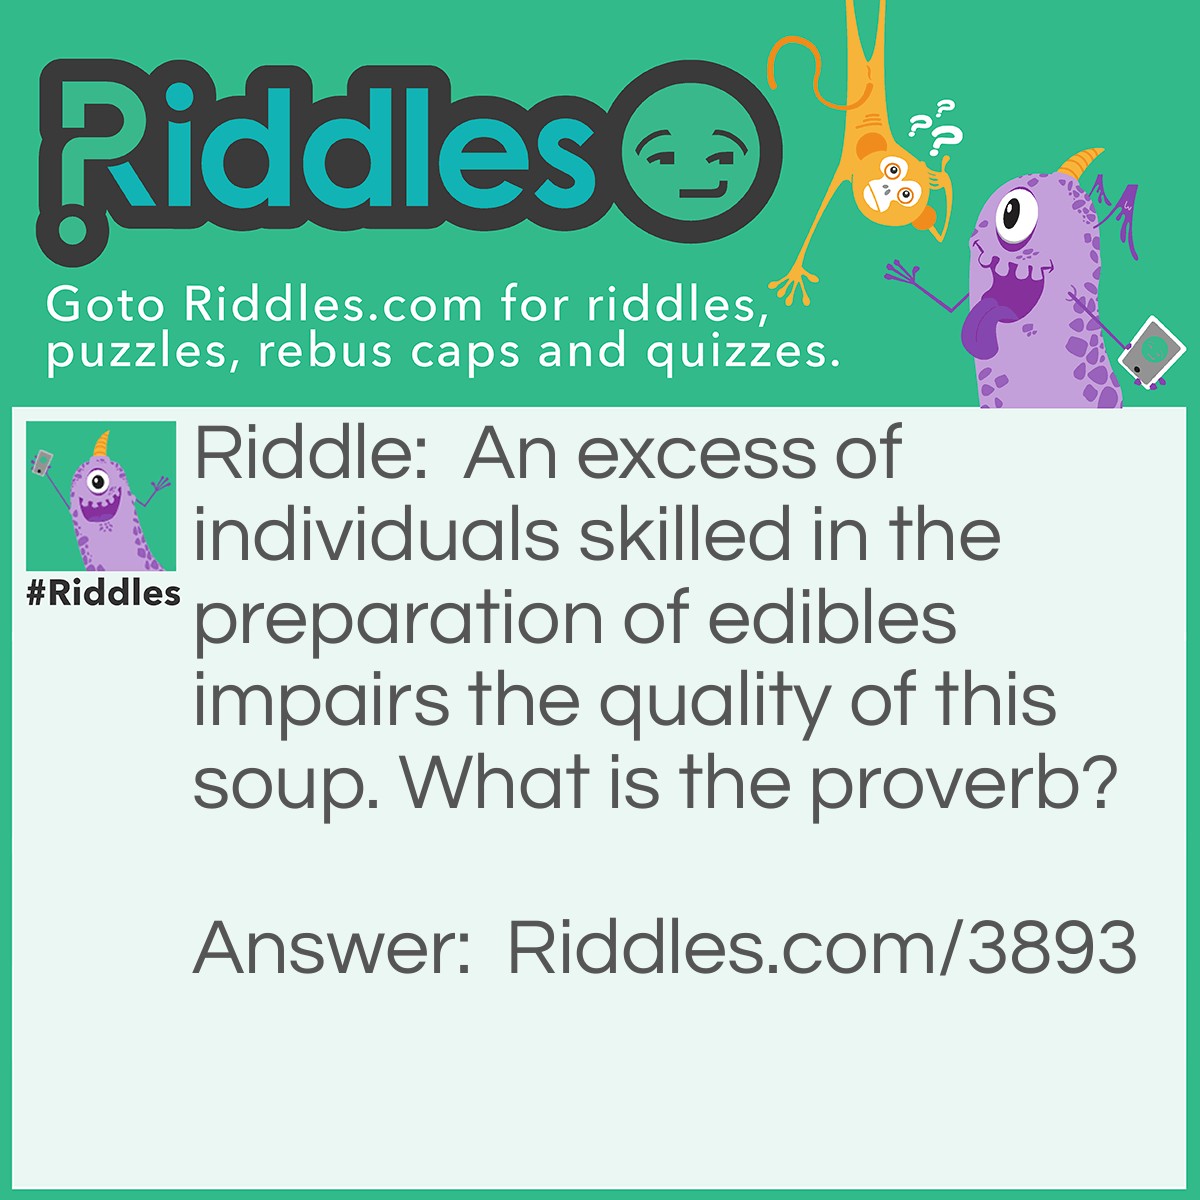 Riddle: An excess of individuals skilled in the preparation of edibles impairs the quality of this soup. What is the proverb? Answer: Too many cooks spoil the broth.